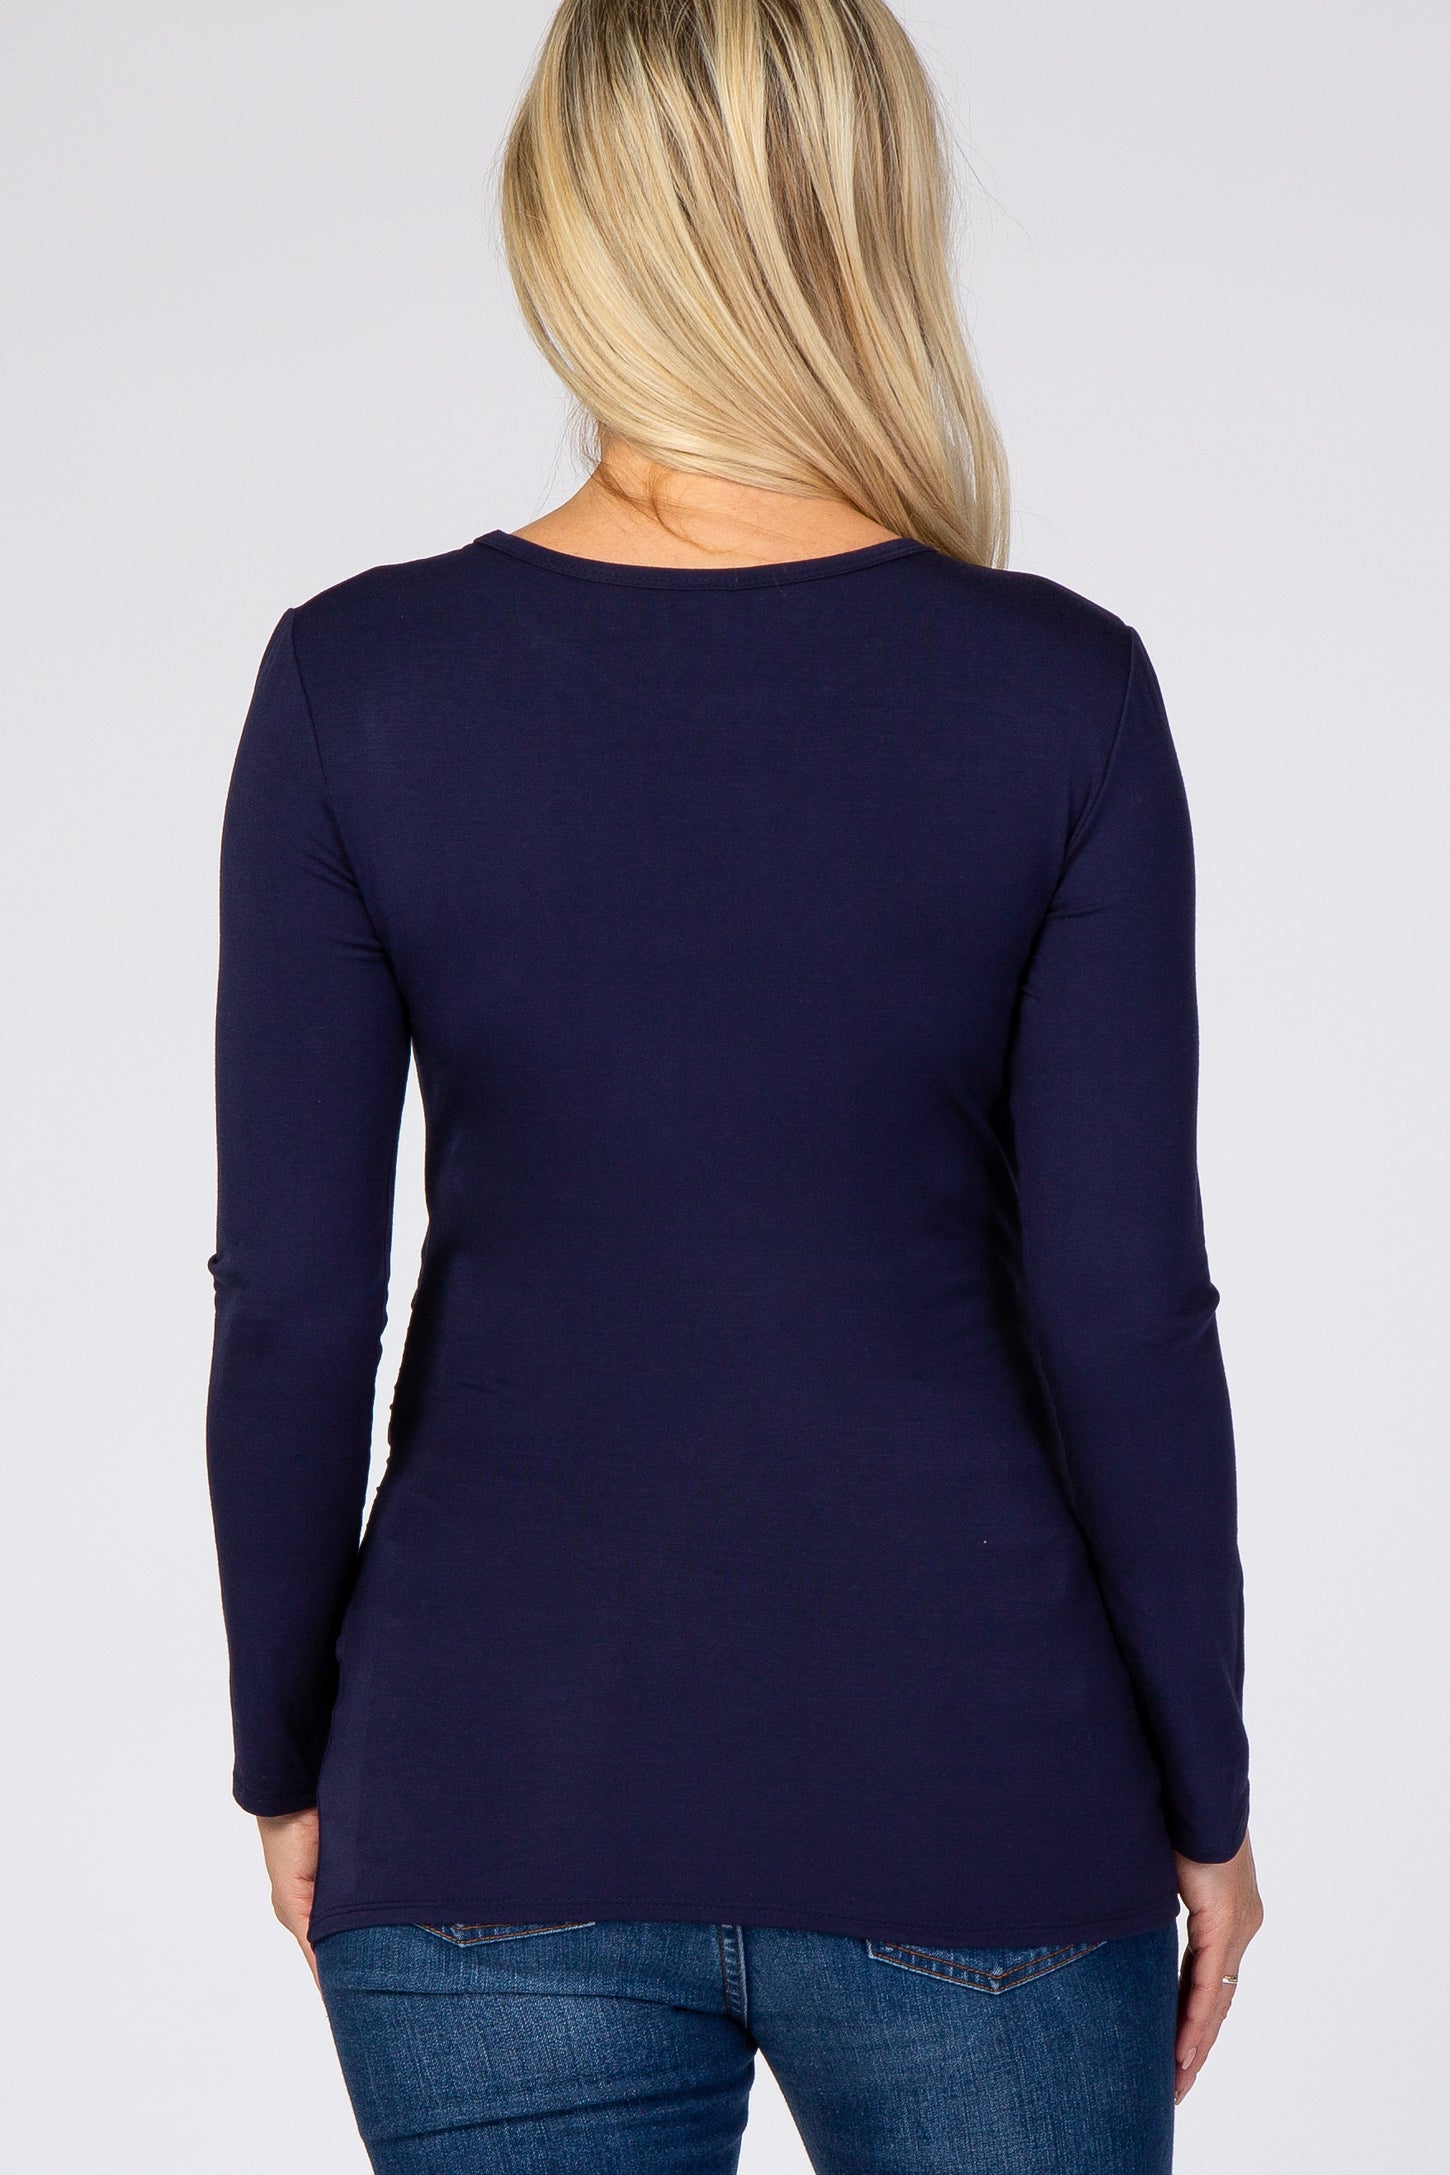 Navy Blue Long Sleeve Ruched Fitted Maternity Top